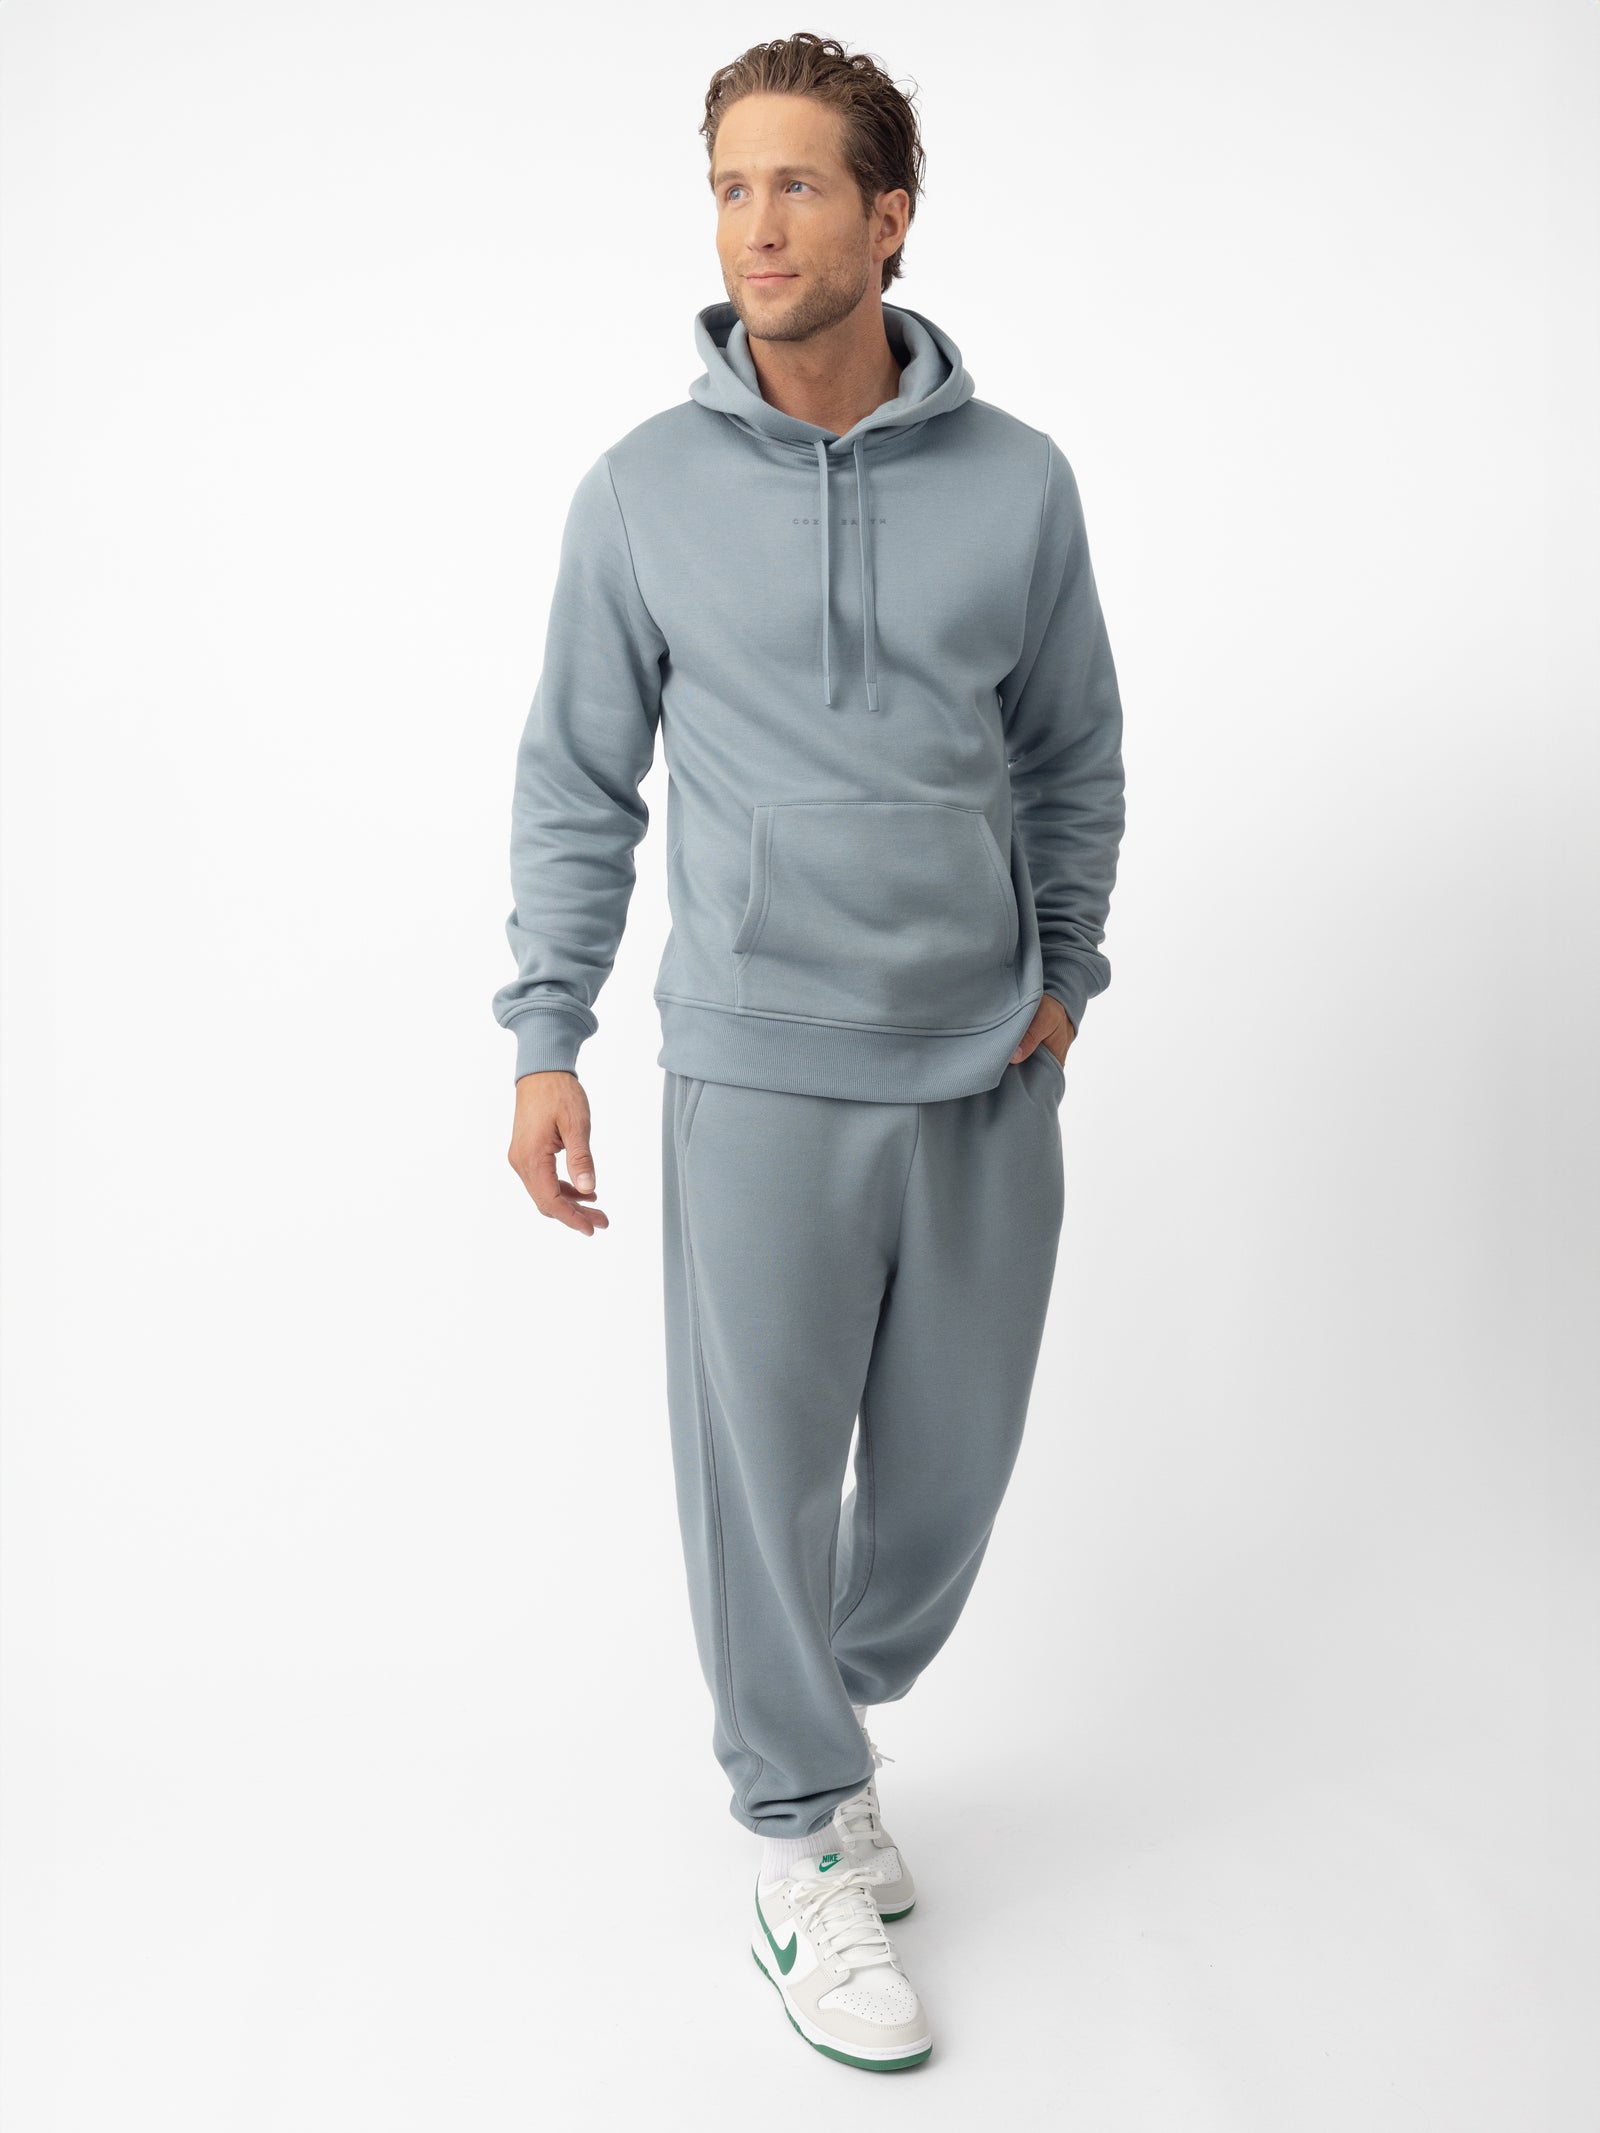 Man wearing smokey blue cityscape hoodie and sweats with white background 